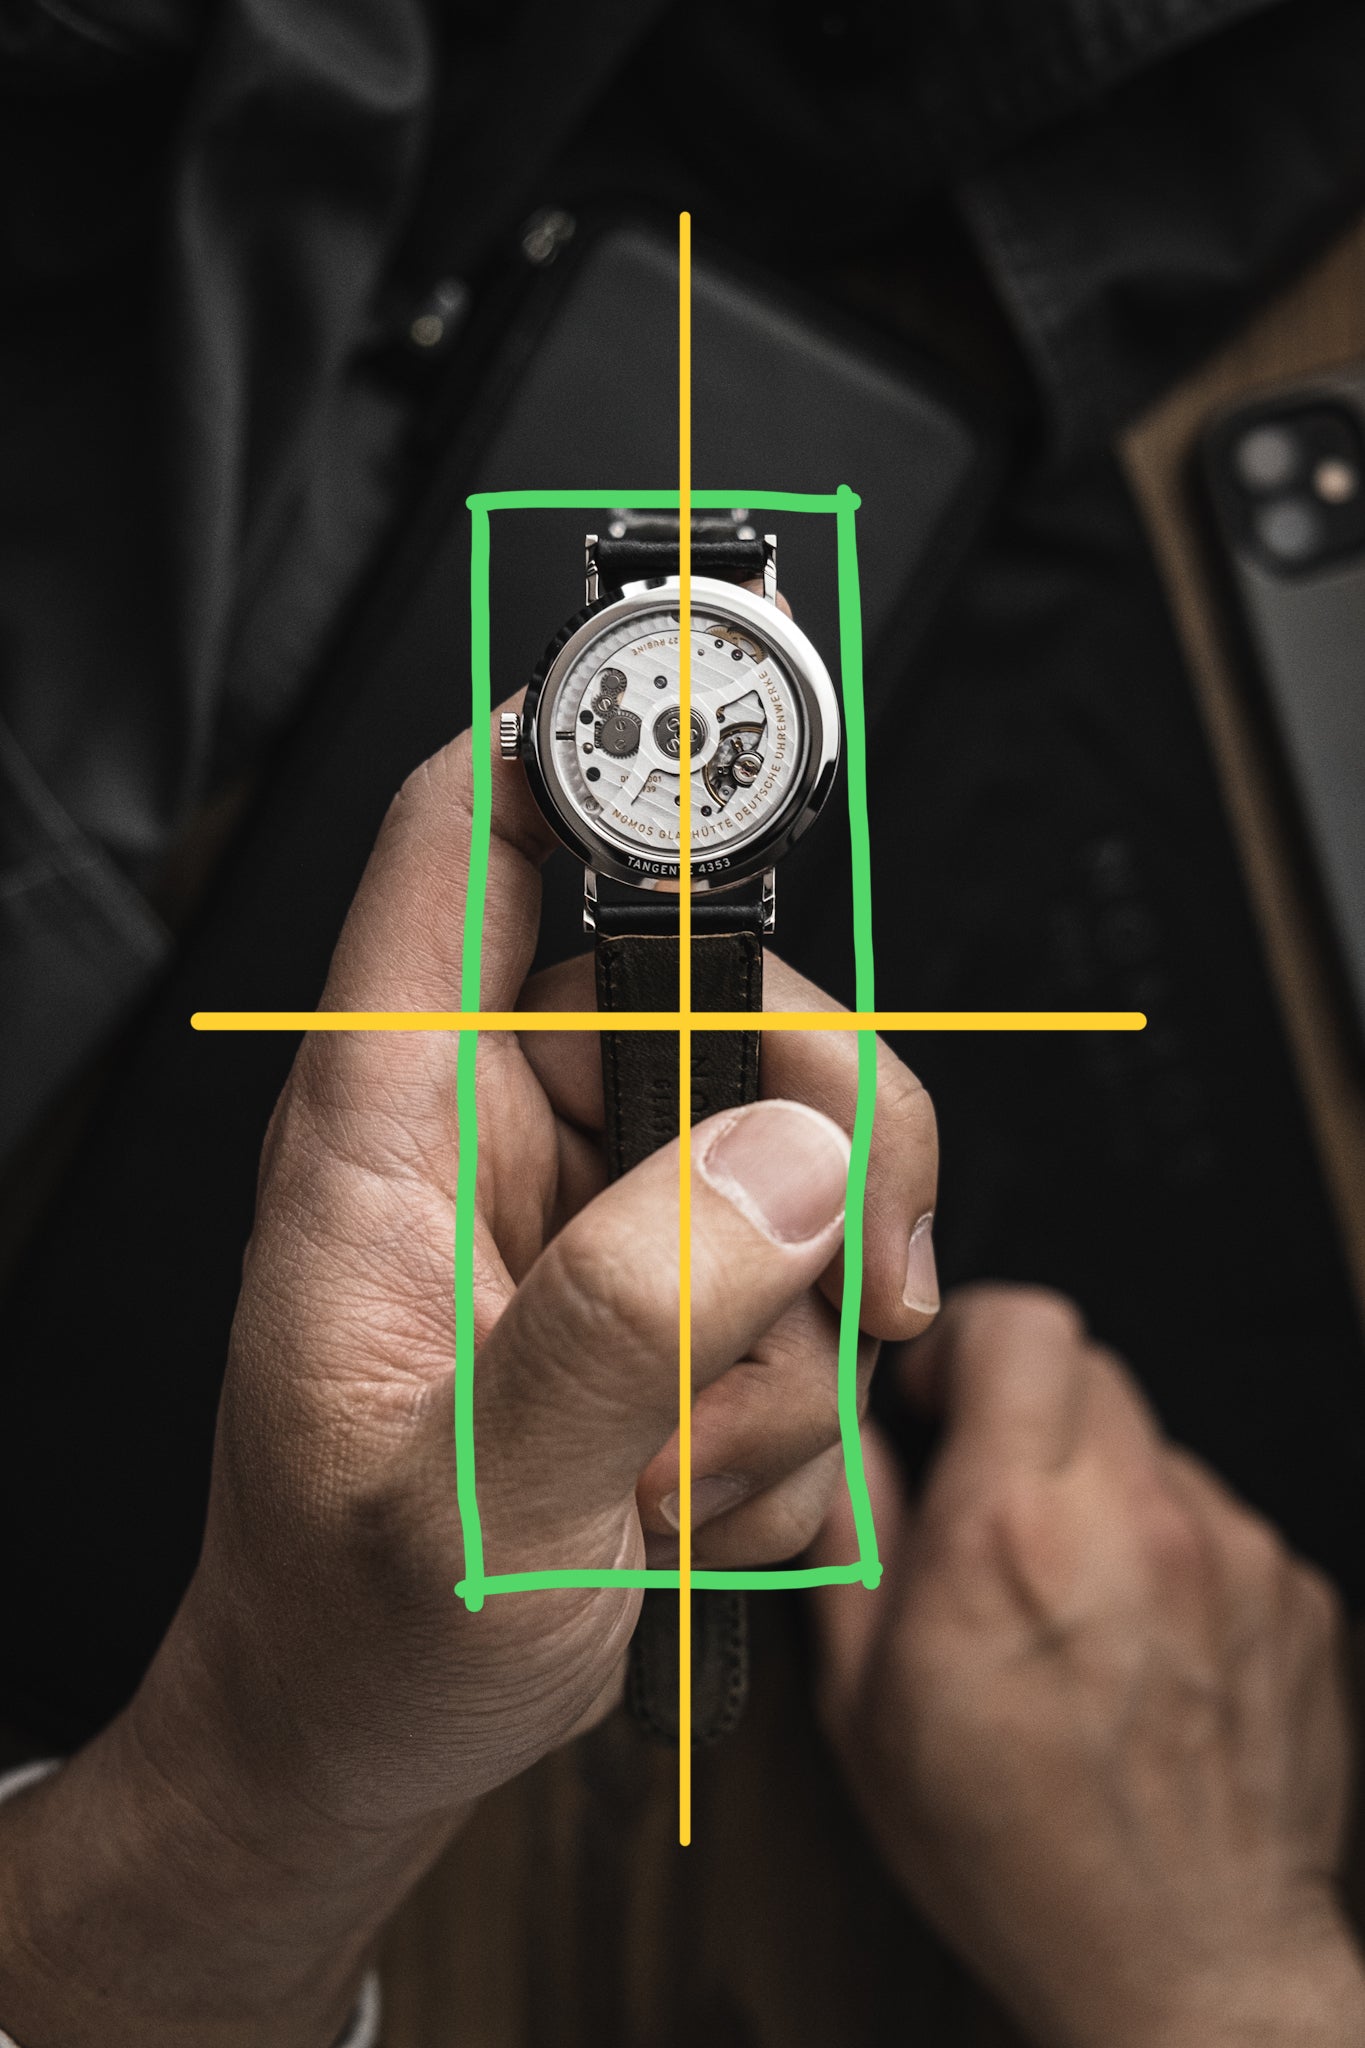 How to properly center a watch in your composition